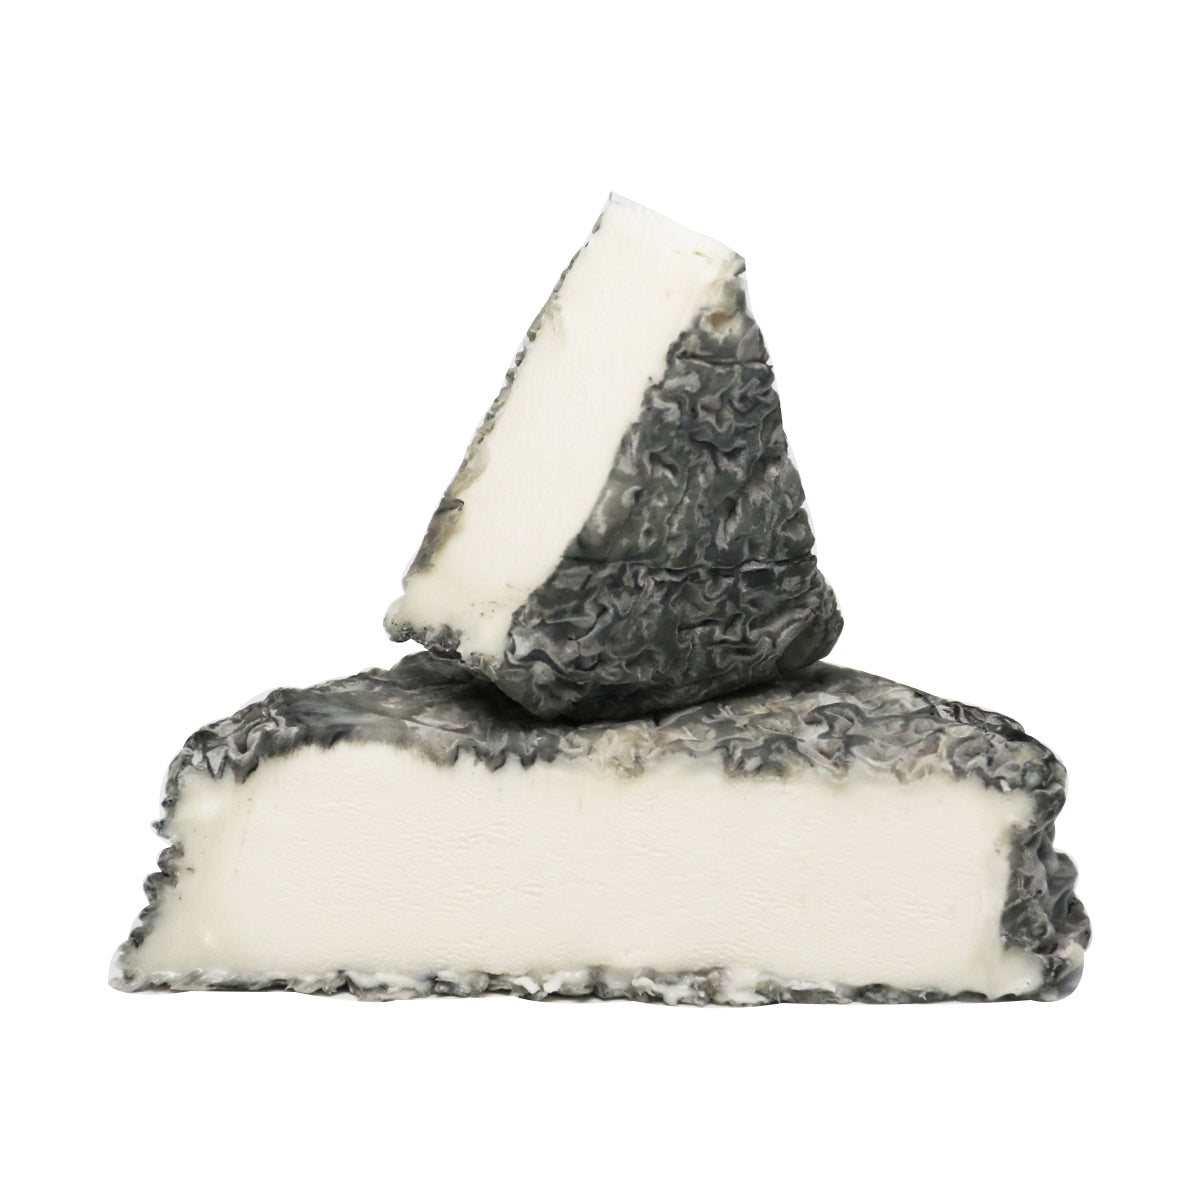 Murray's Selles-Sur-Cher Cheese